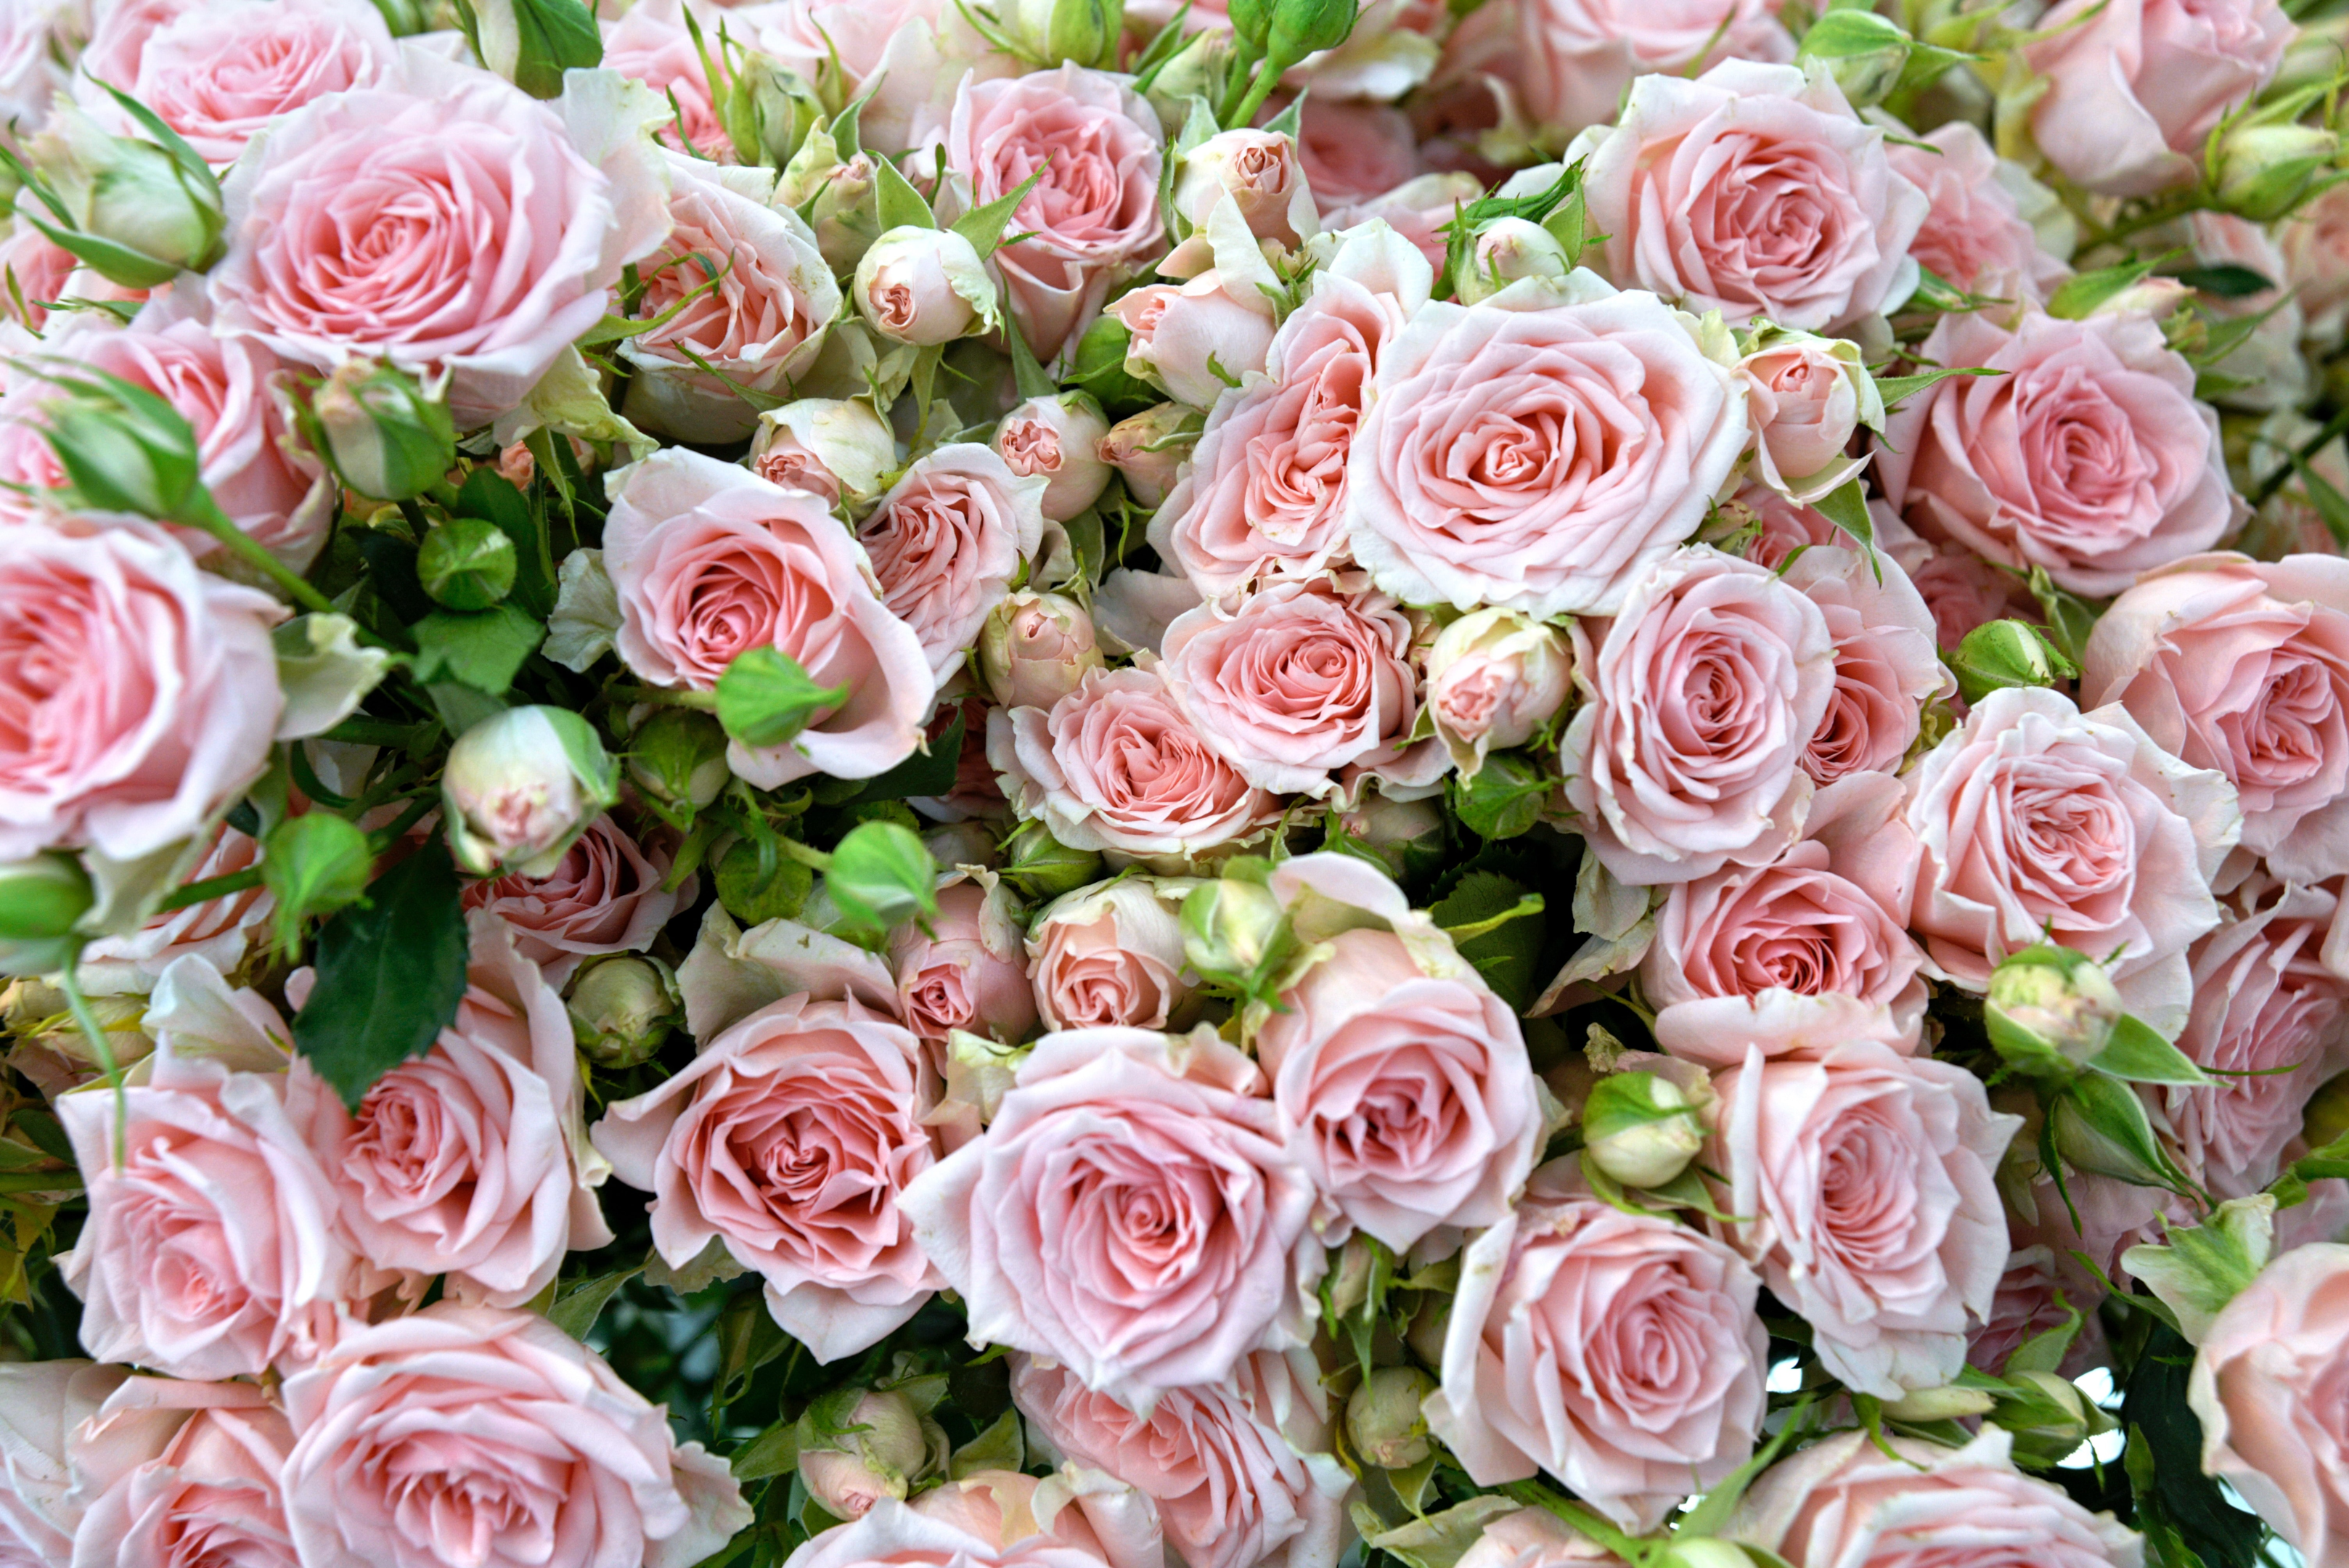 What Factors Do You Consider Before Choosing Compost for Roses?